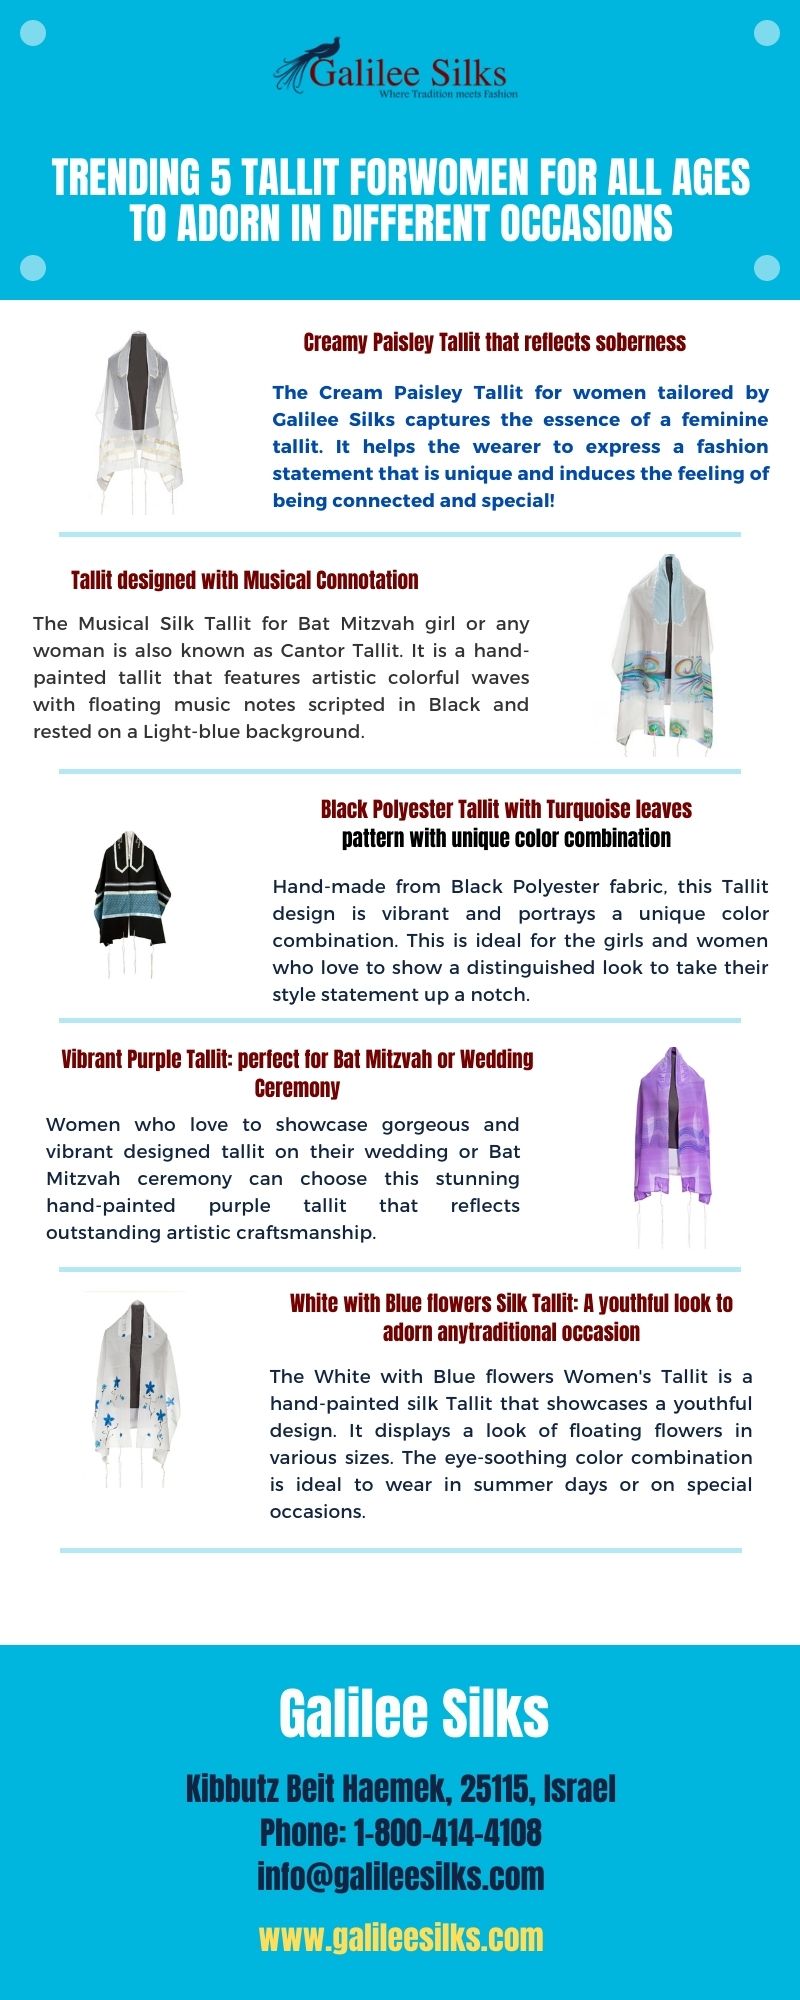 Trending 5 Tallit for Women for all Ages to Adorn in Different Occasions Check out different types of Tallit for Women to feel festive and blessed in any special occasion. Buy women tallit that serves a different taste of the wearers of all ages. Visit Galilee Silks. For more details, visit: https://bit.ly/3qzn4GH
 by amramrafi